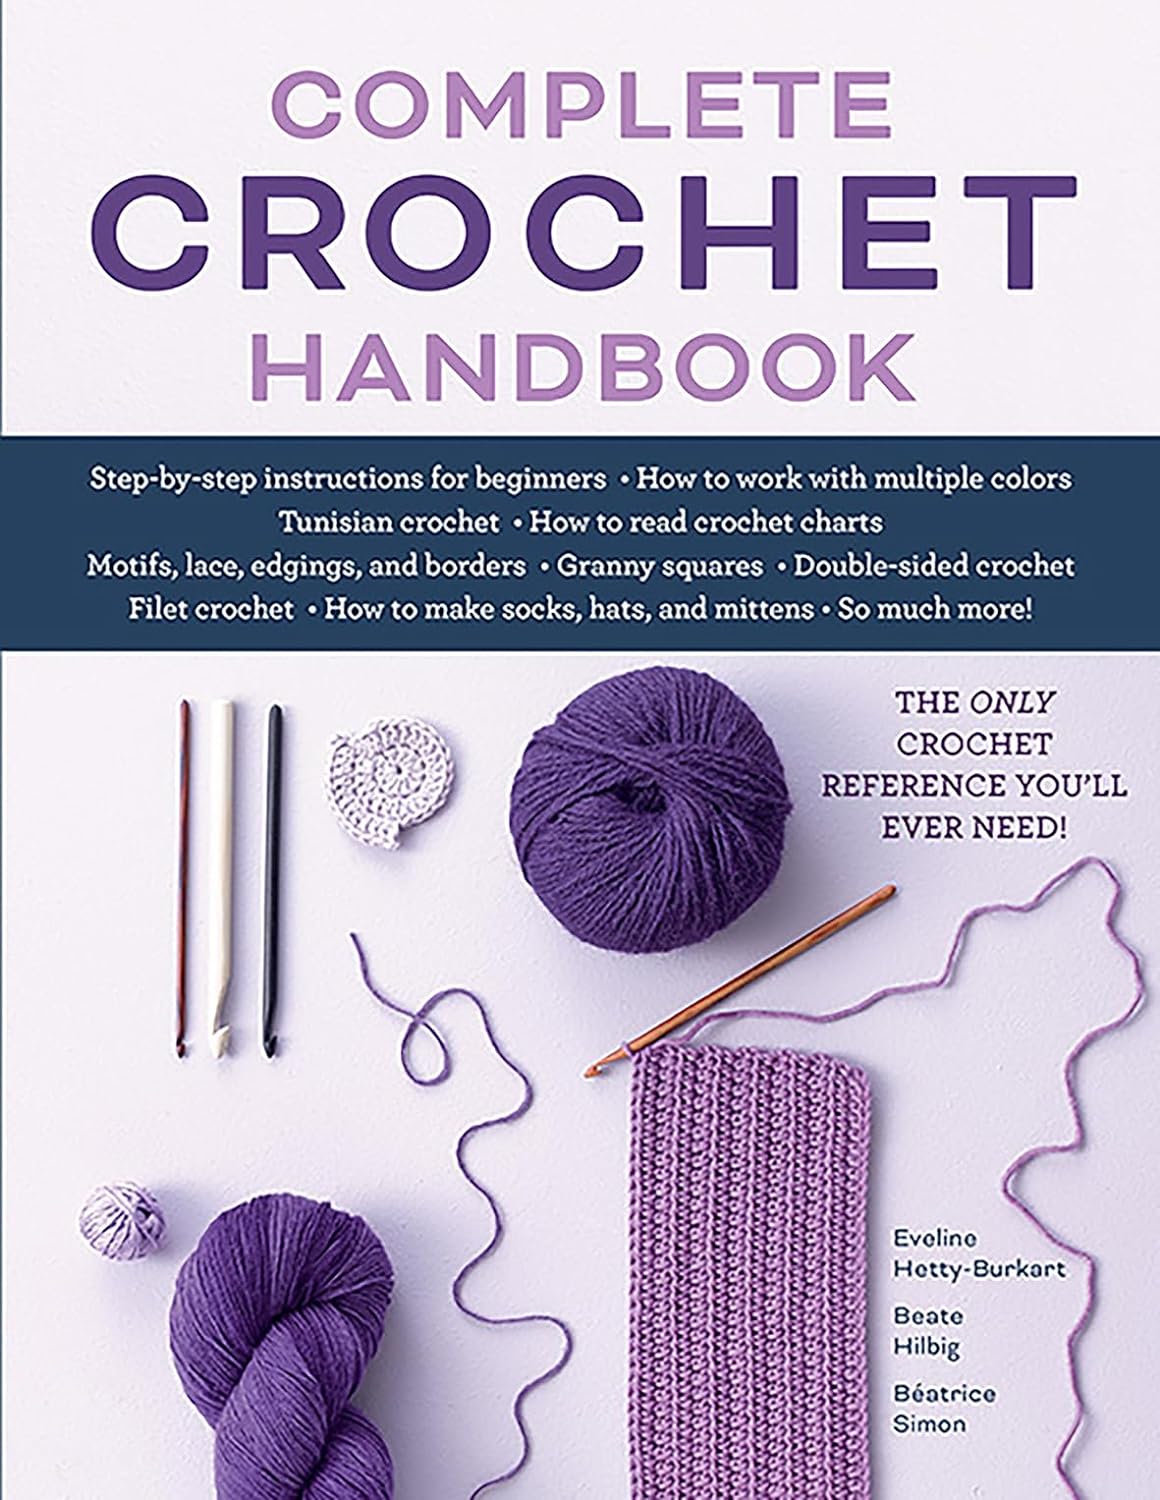 Complete Crochet Handbook: The Only Crochet Reference You'll Ever Need - SureShot Books Publishing LLC